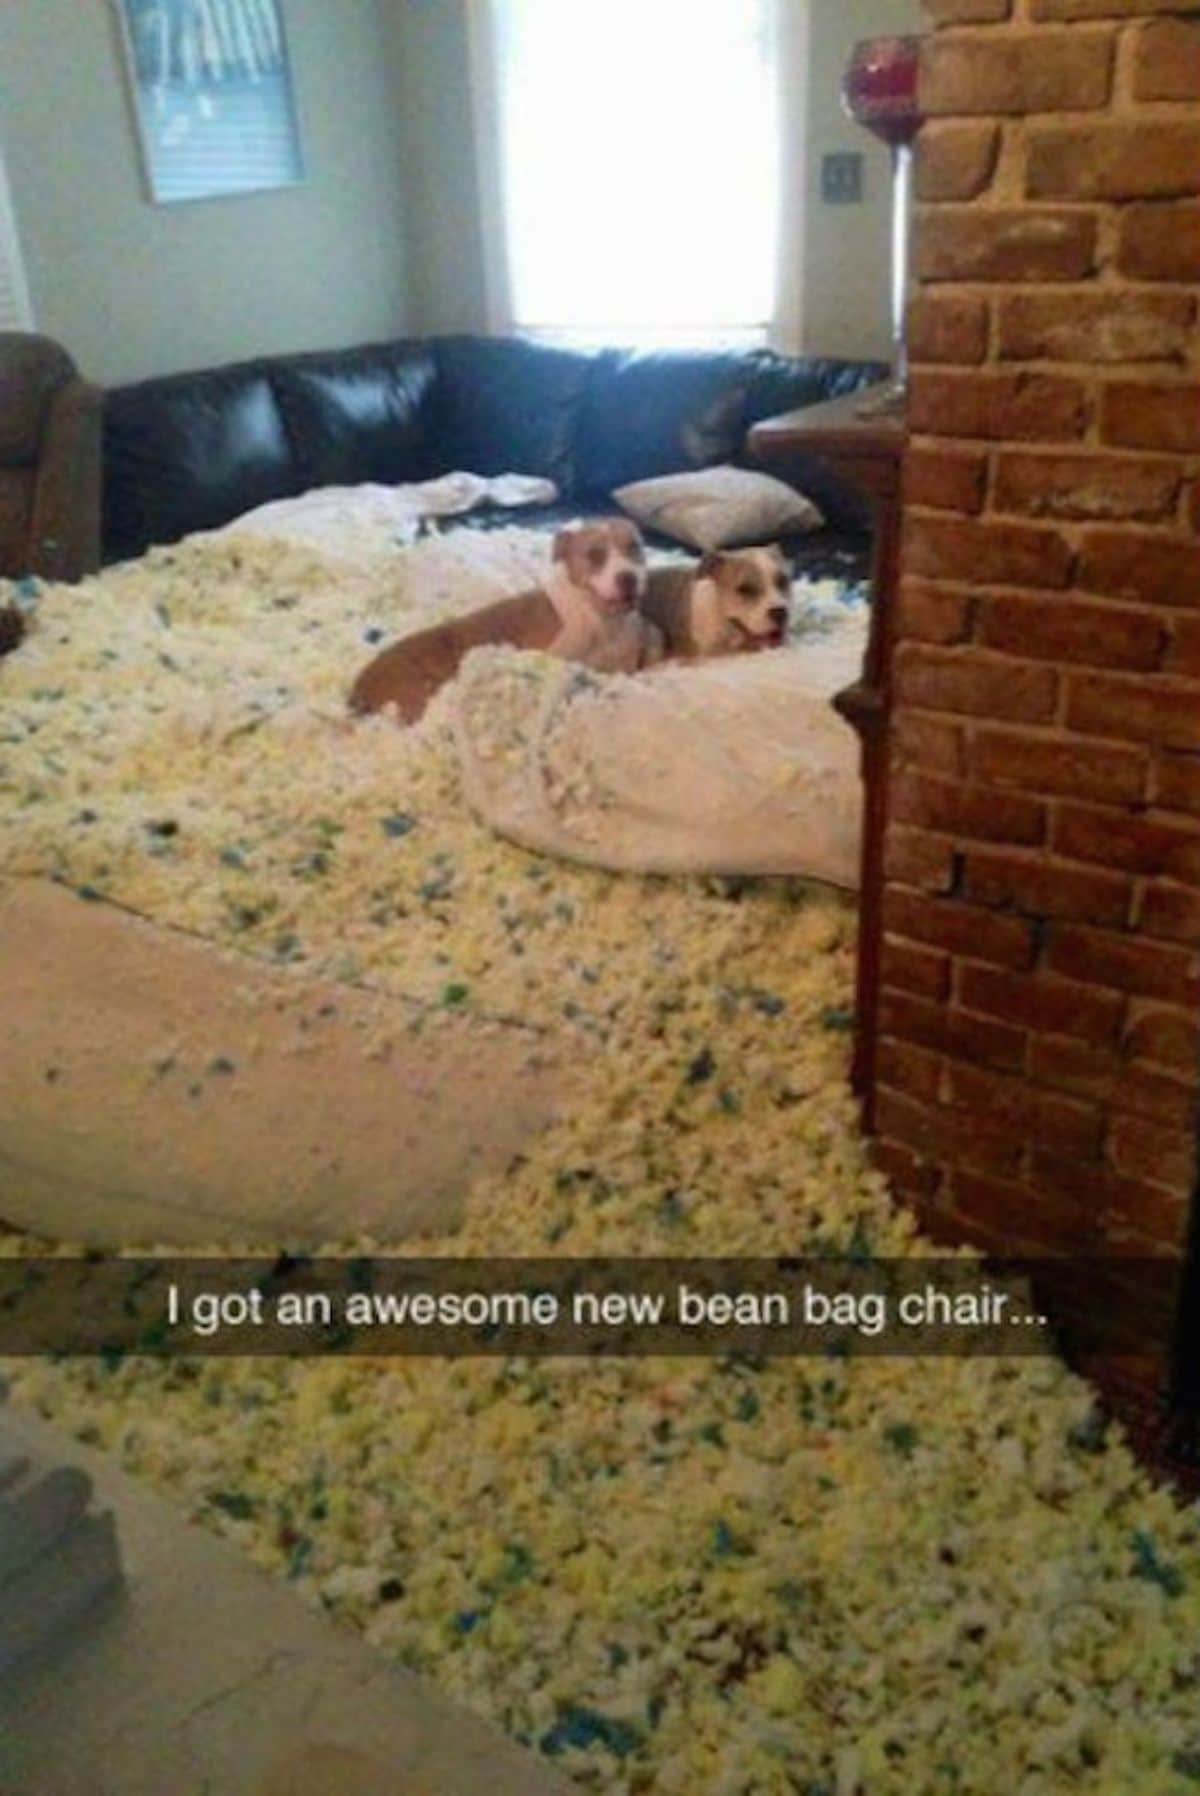 2 brown and white dogs laying on the floor surrounded by pieces of fluffy from a bean bag chair with a caption saying I got an awesome new bean bag chair...